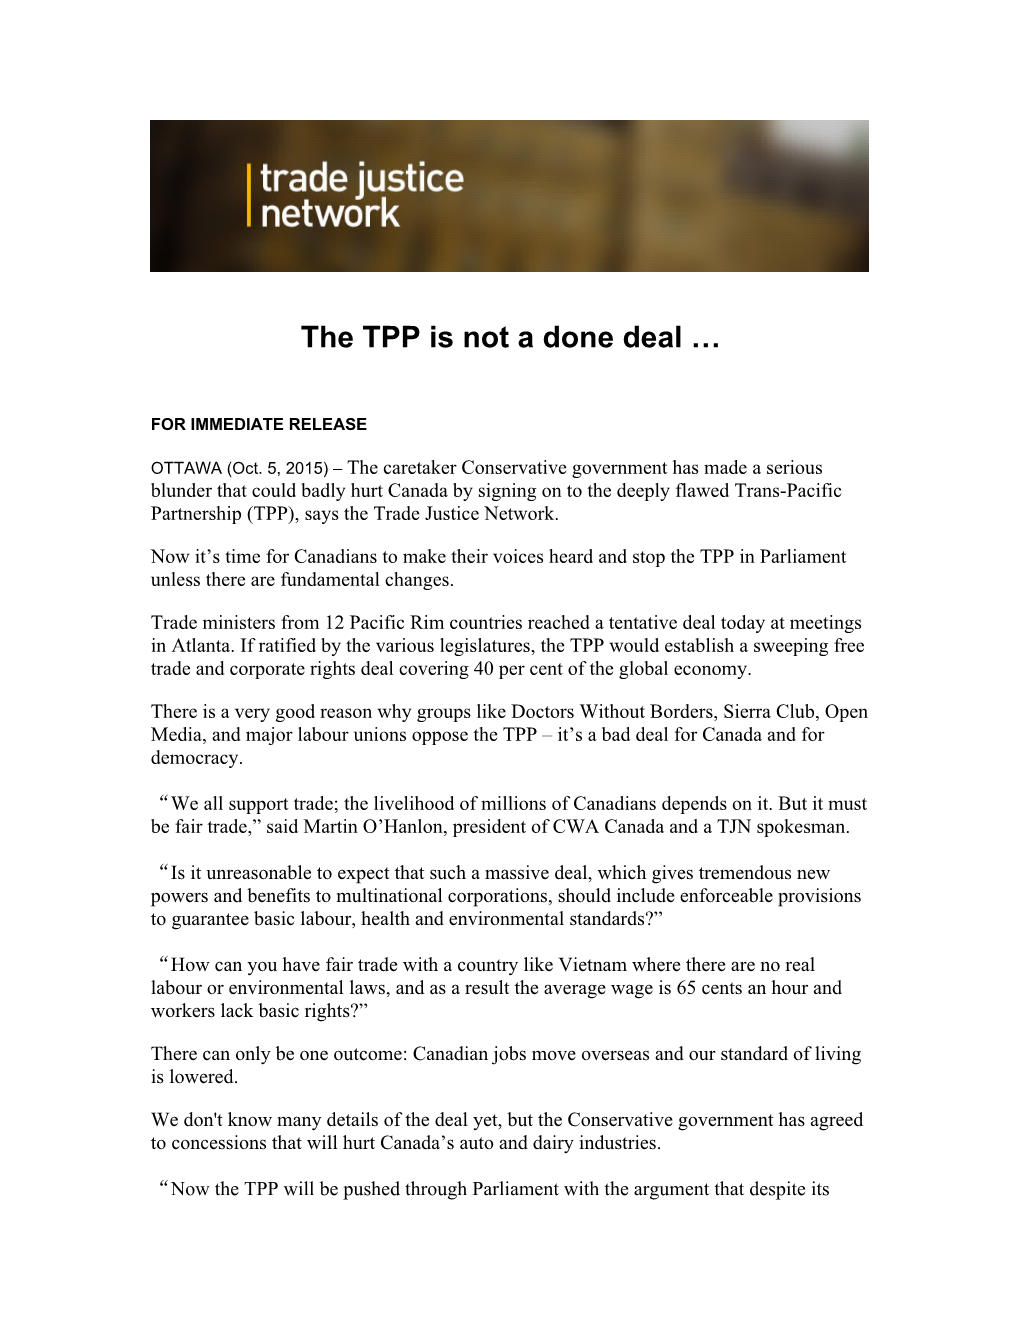 The TPP Is Not a Done Deal